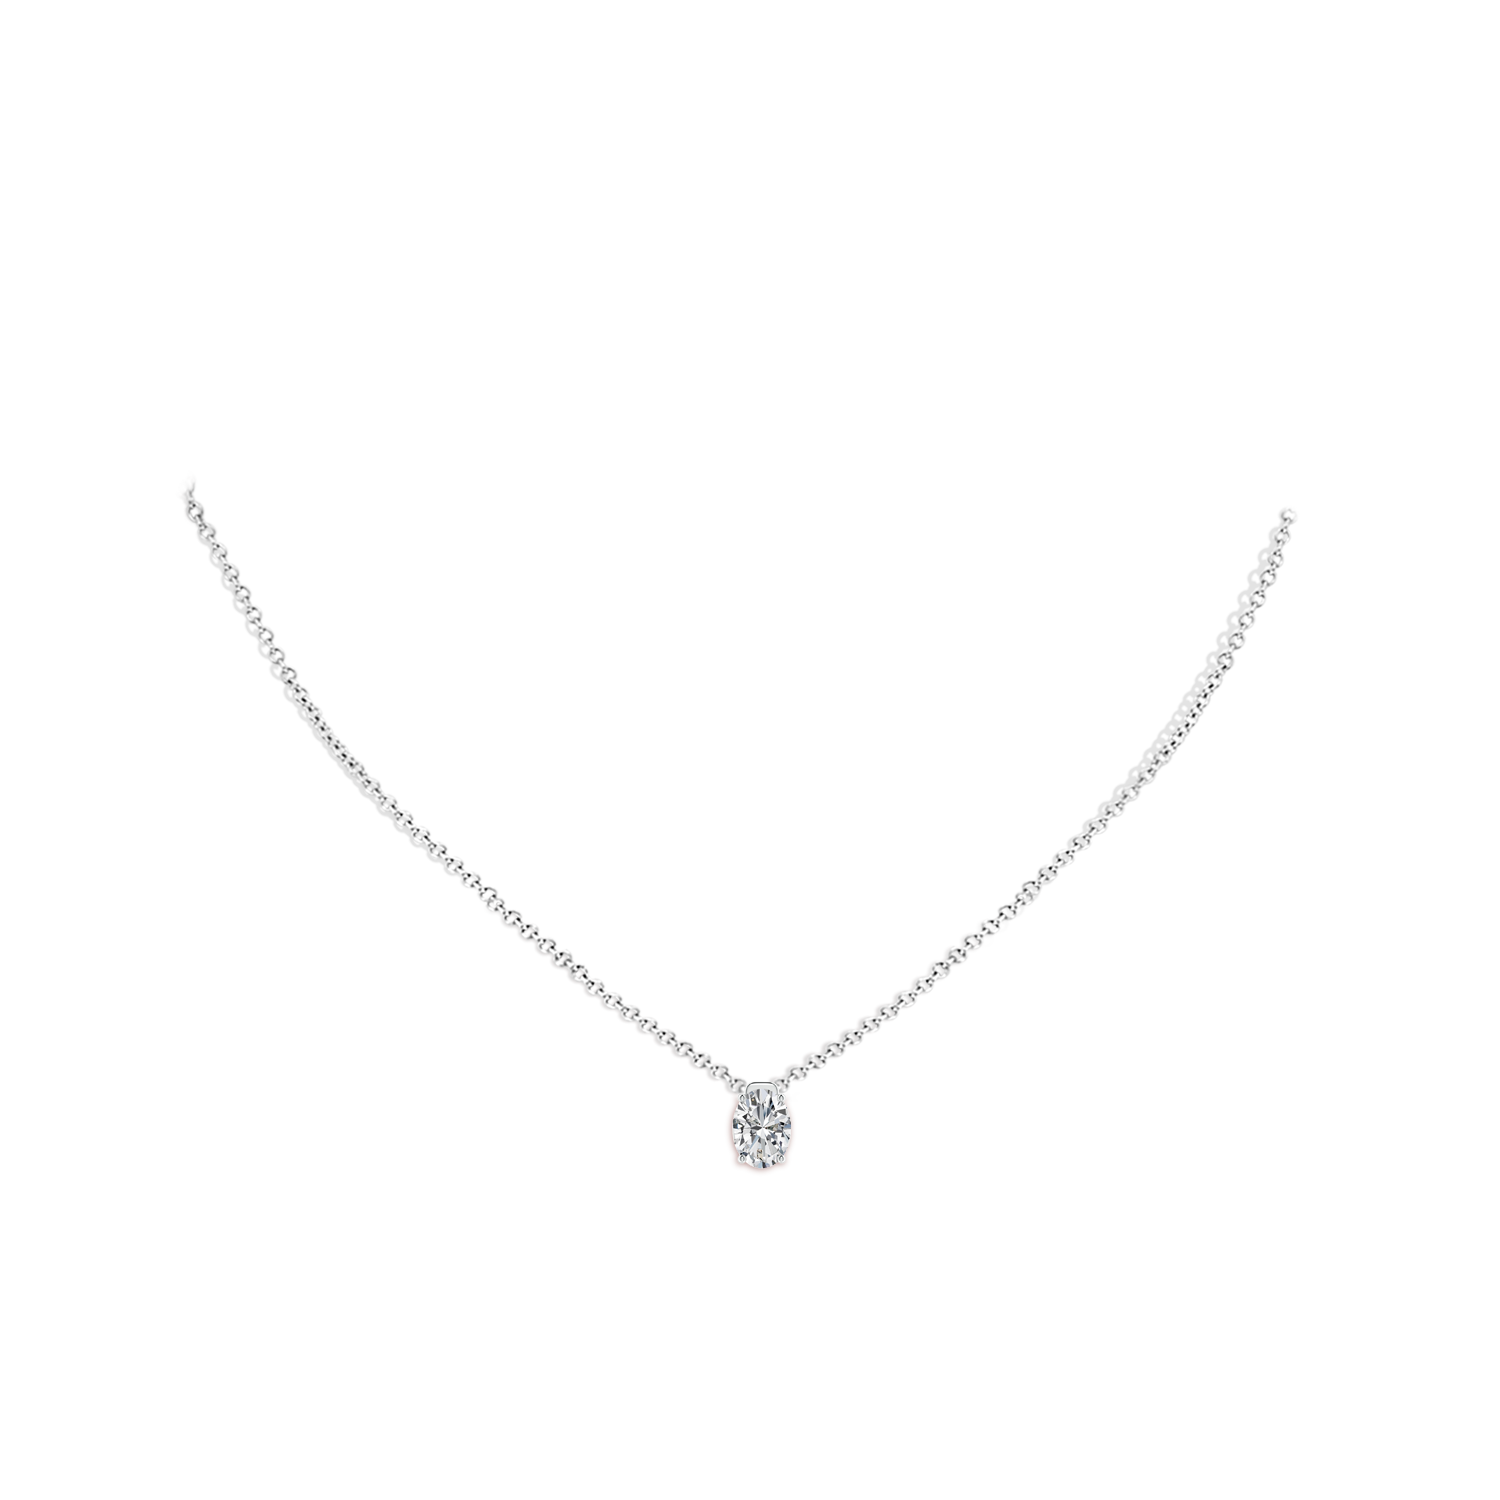 H, SI2 / 1 CT / 18 KT White Gold